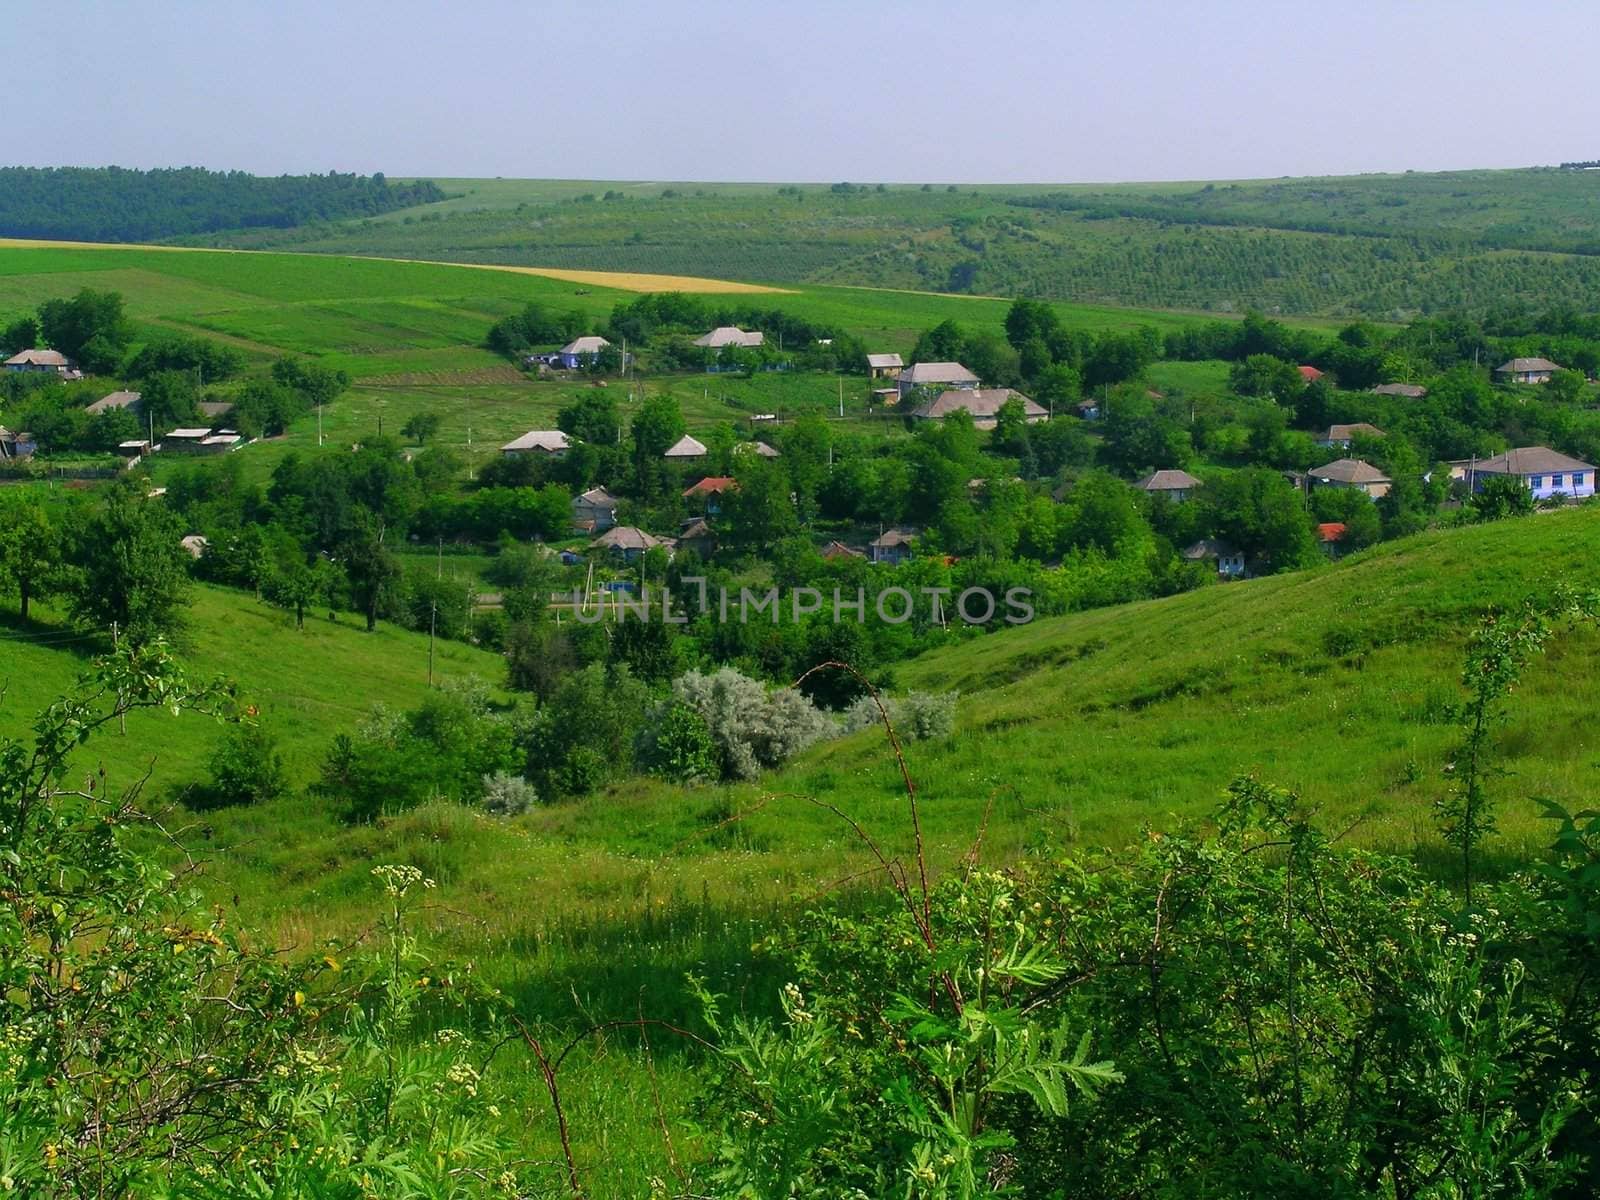 View of small, rural village